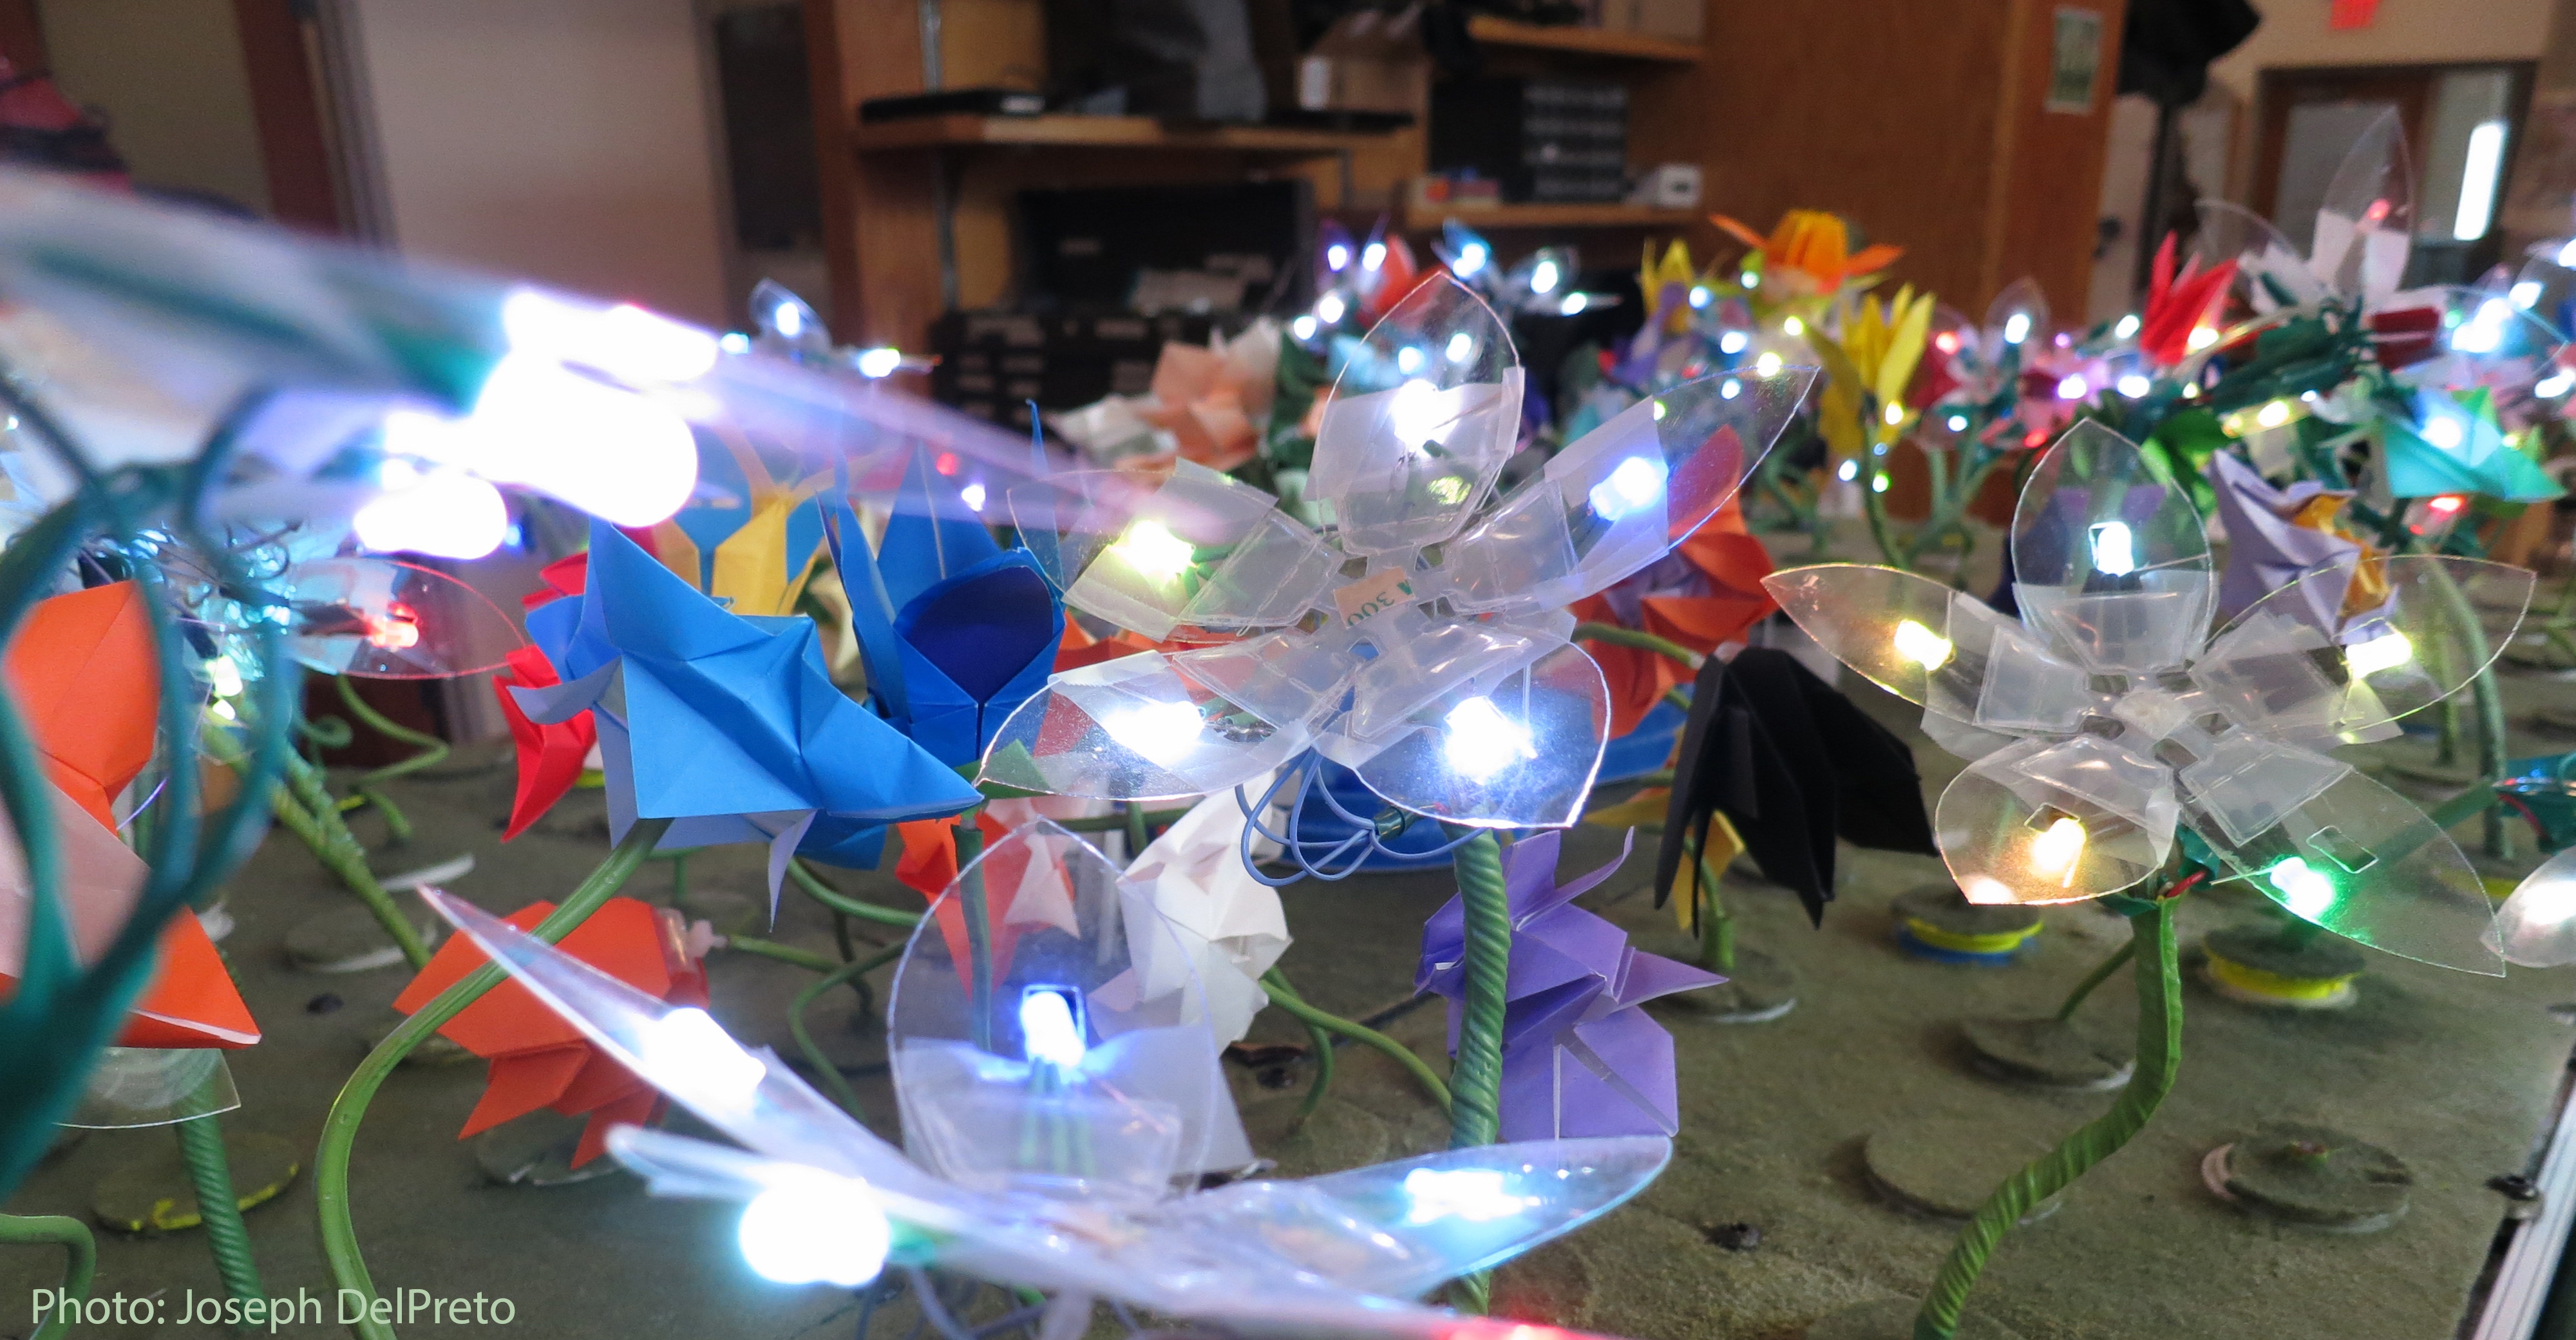 The distributed robot garden, with pneumatically actuated origami flowers and LEDs